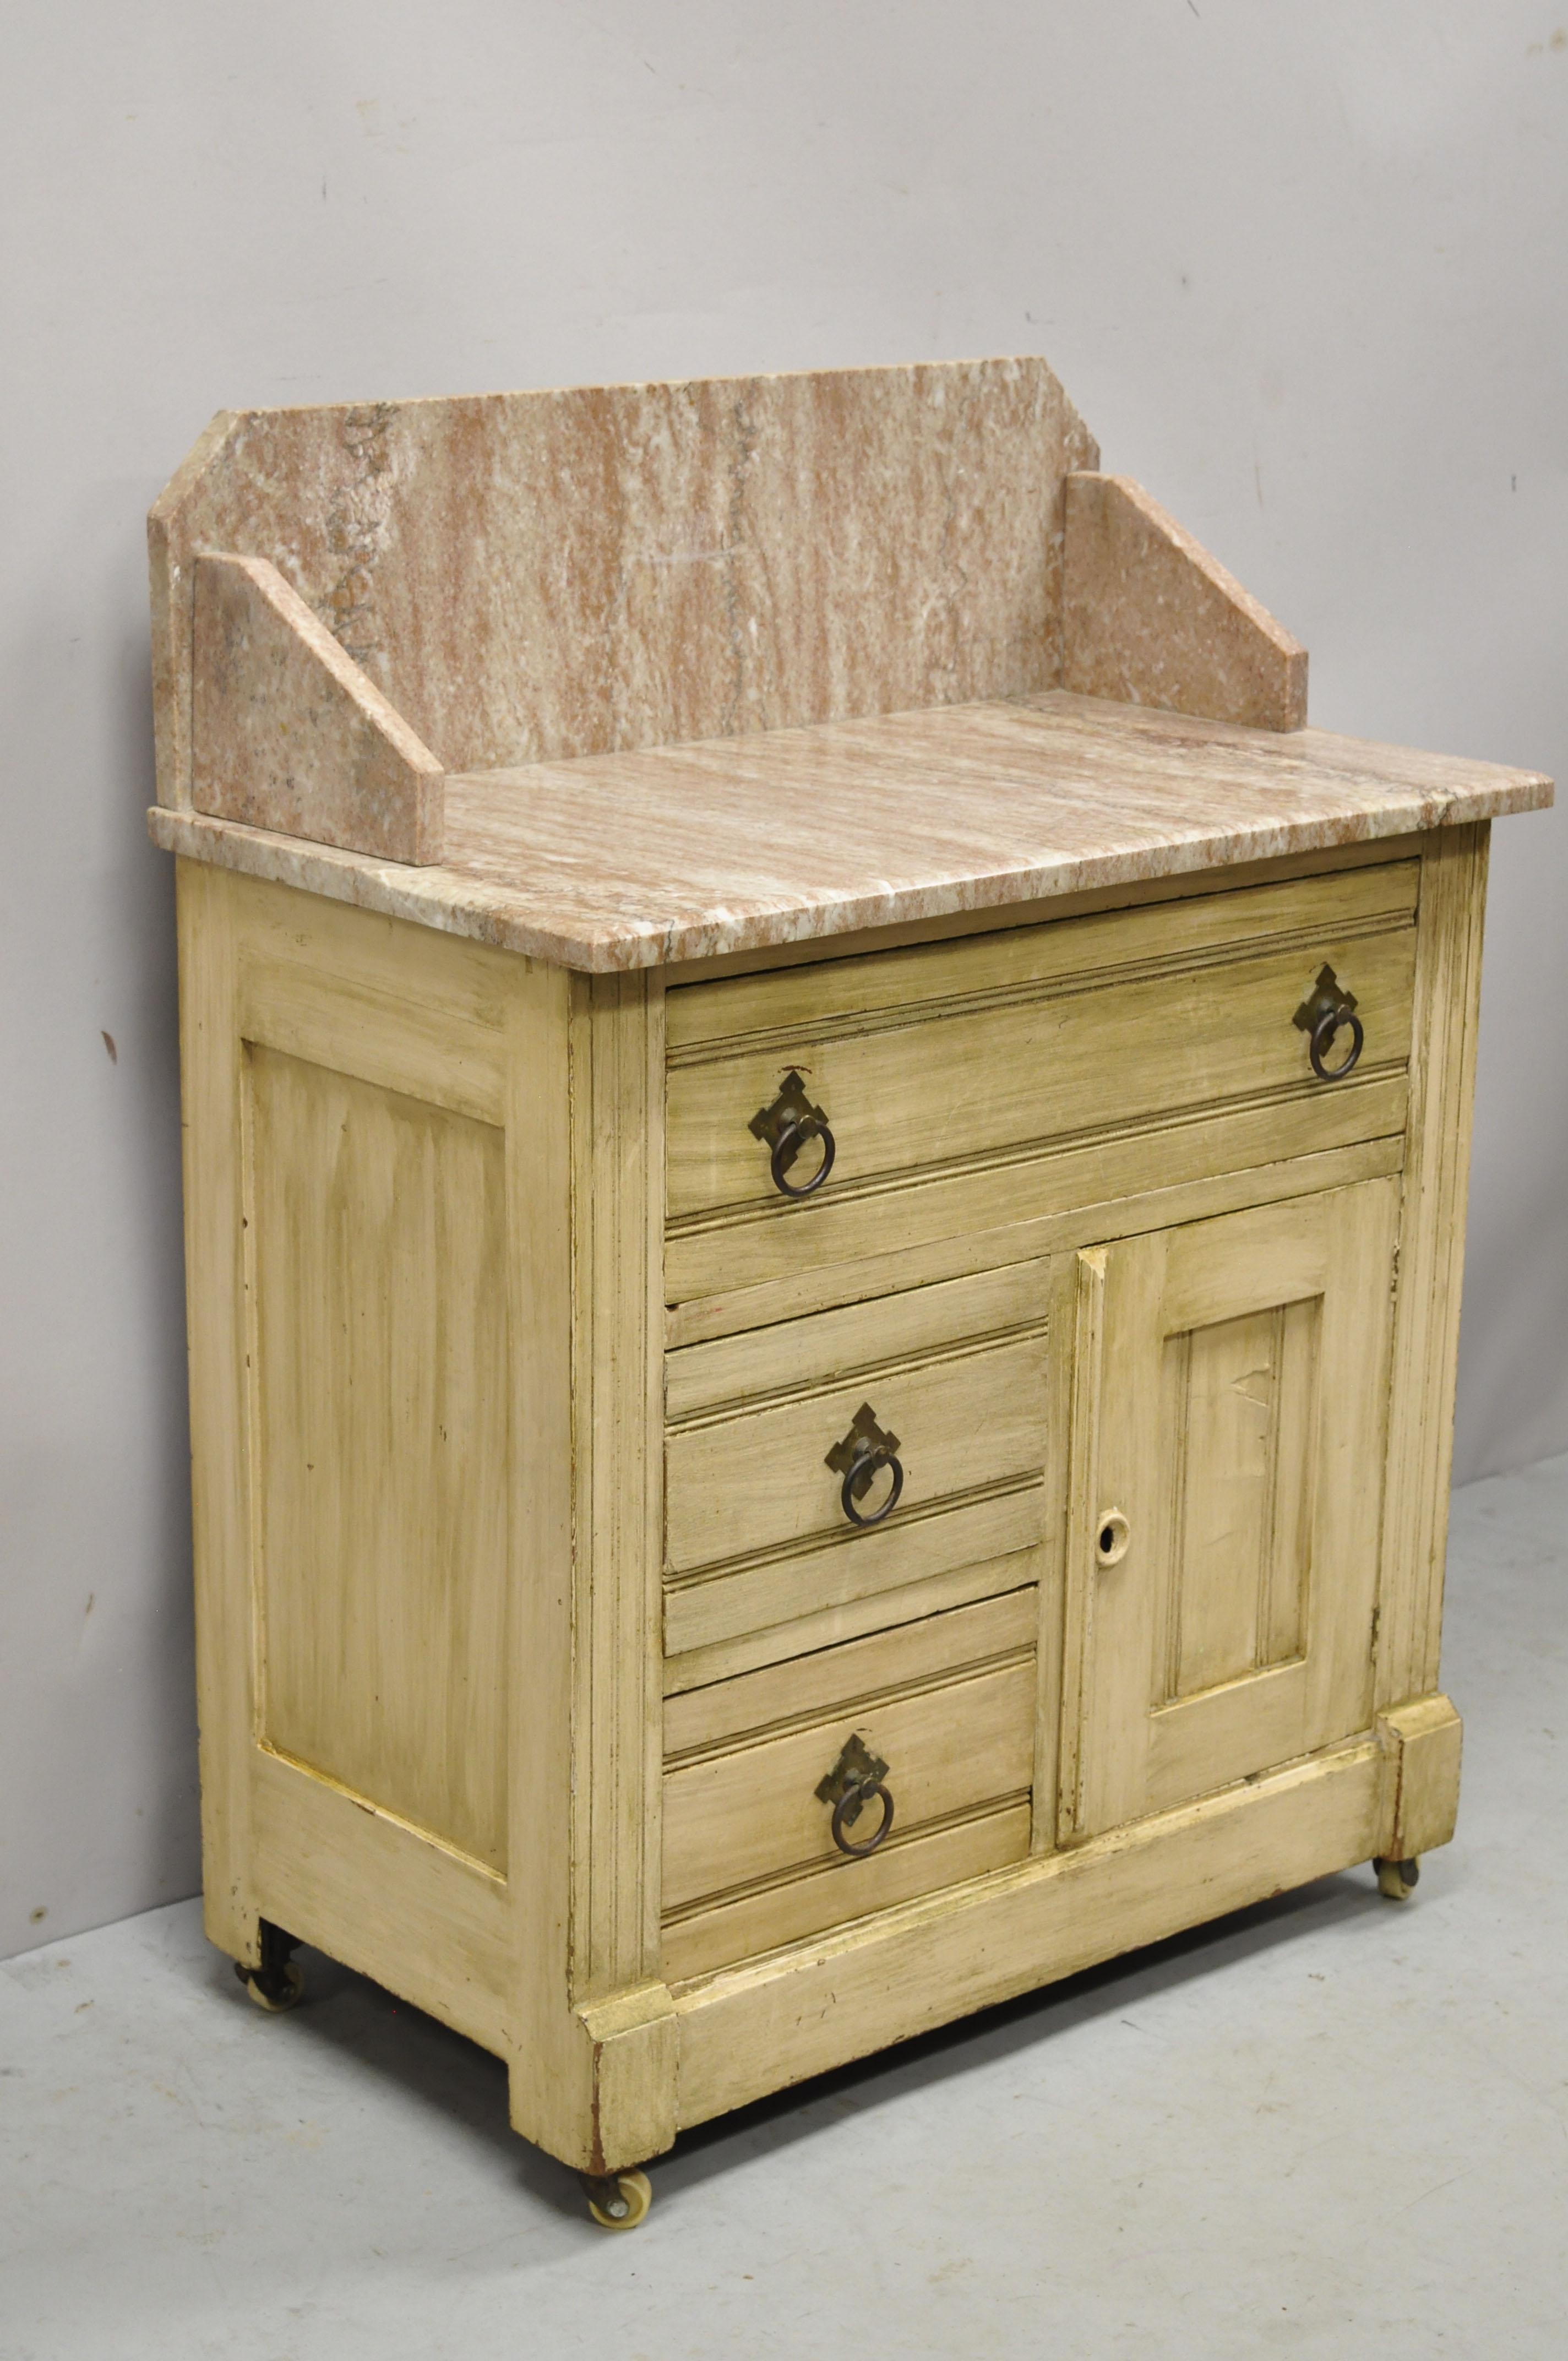 Antique 19th Century American Victorian pink marble top backsplash washstand table cabinet. Item features pink marble backsplash, 1 swing door, no key, but unlocked, 3 dovetailed drawers, solid brass hardware, very nice antique item, quality